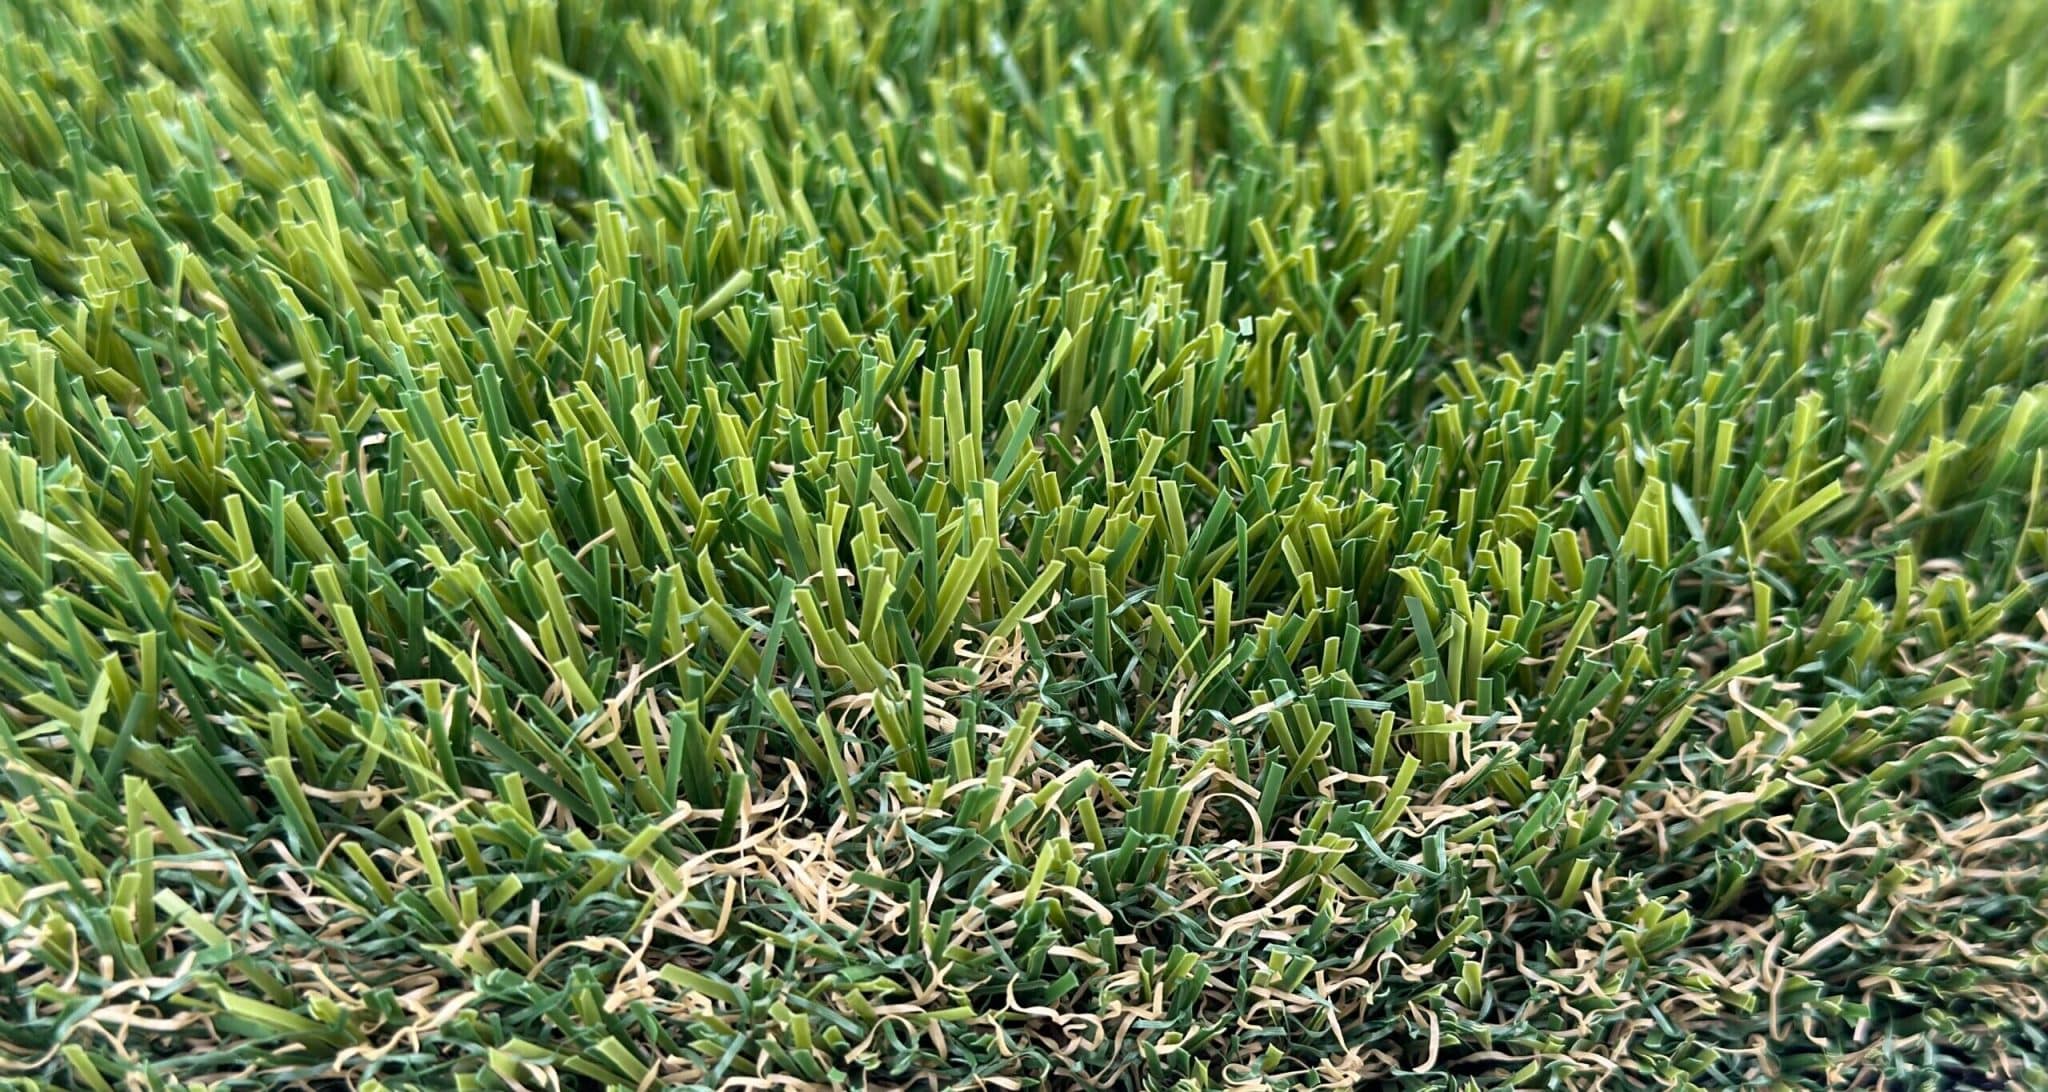 Turf in use